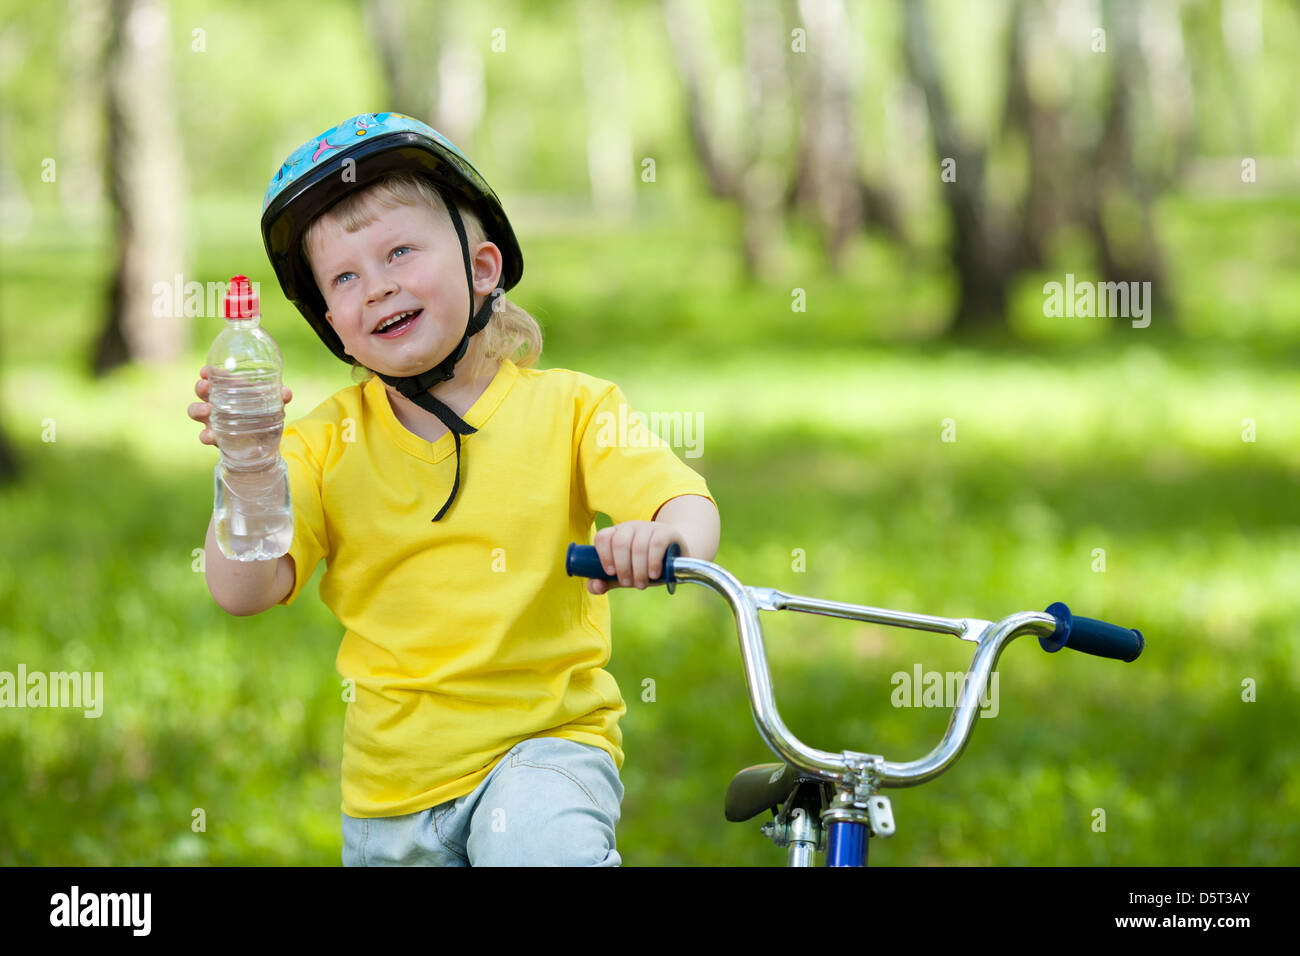 Cute kid on bicycle. Child holding bottle with water. Stock Photo